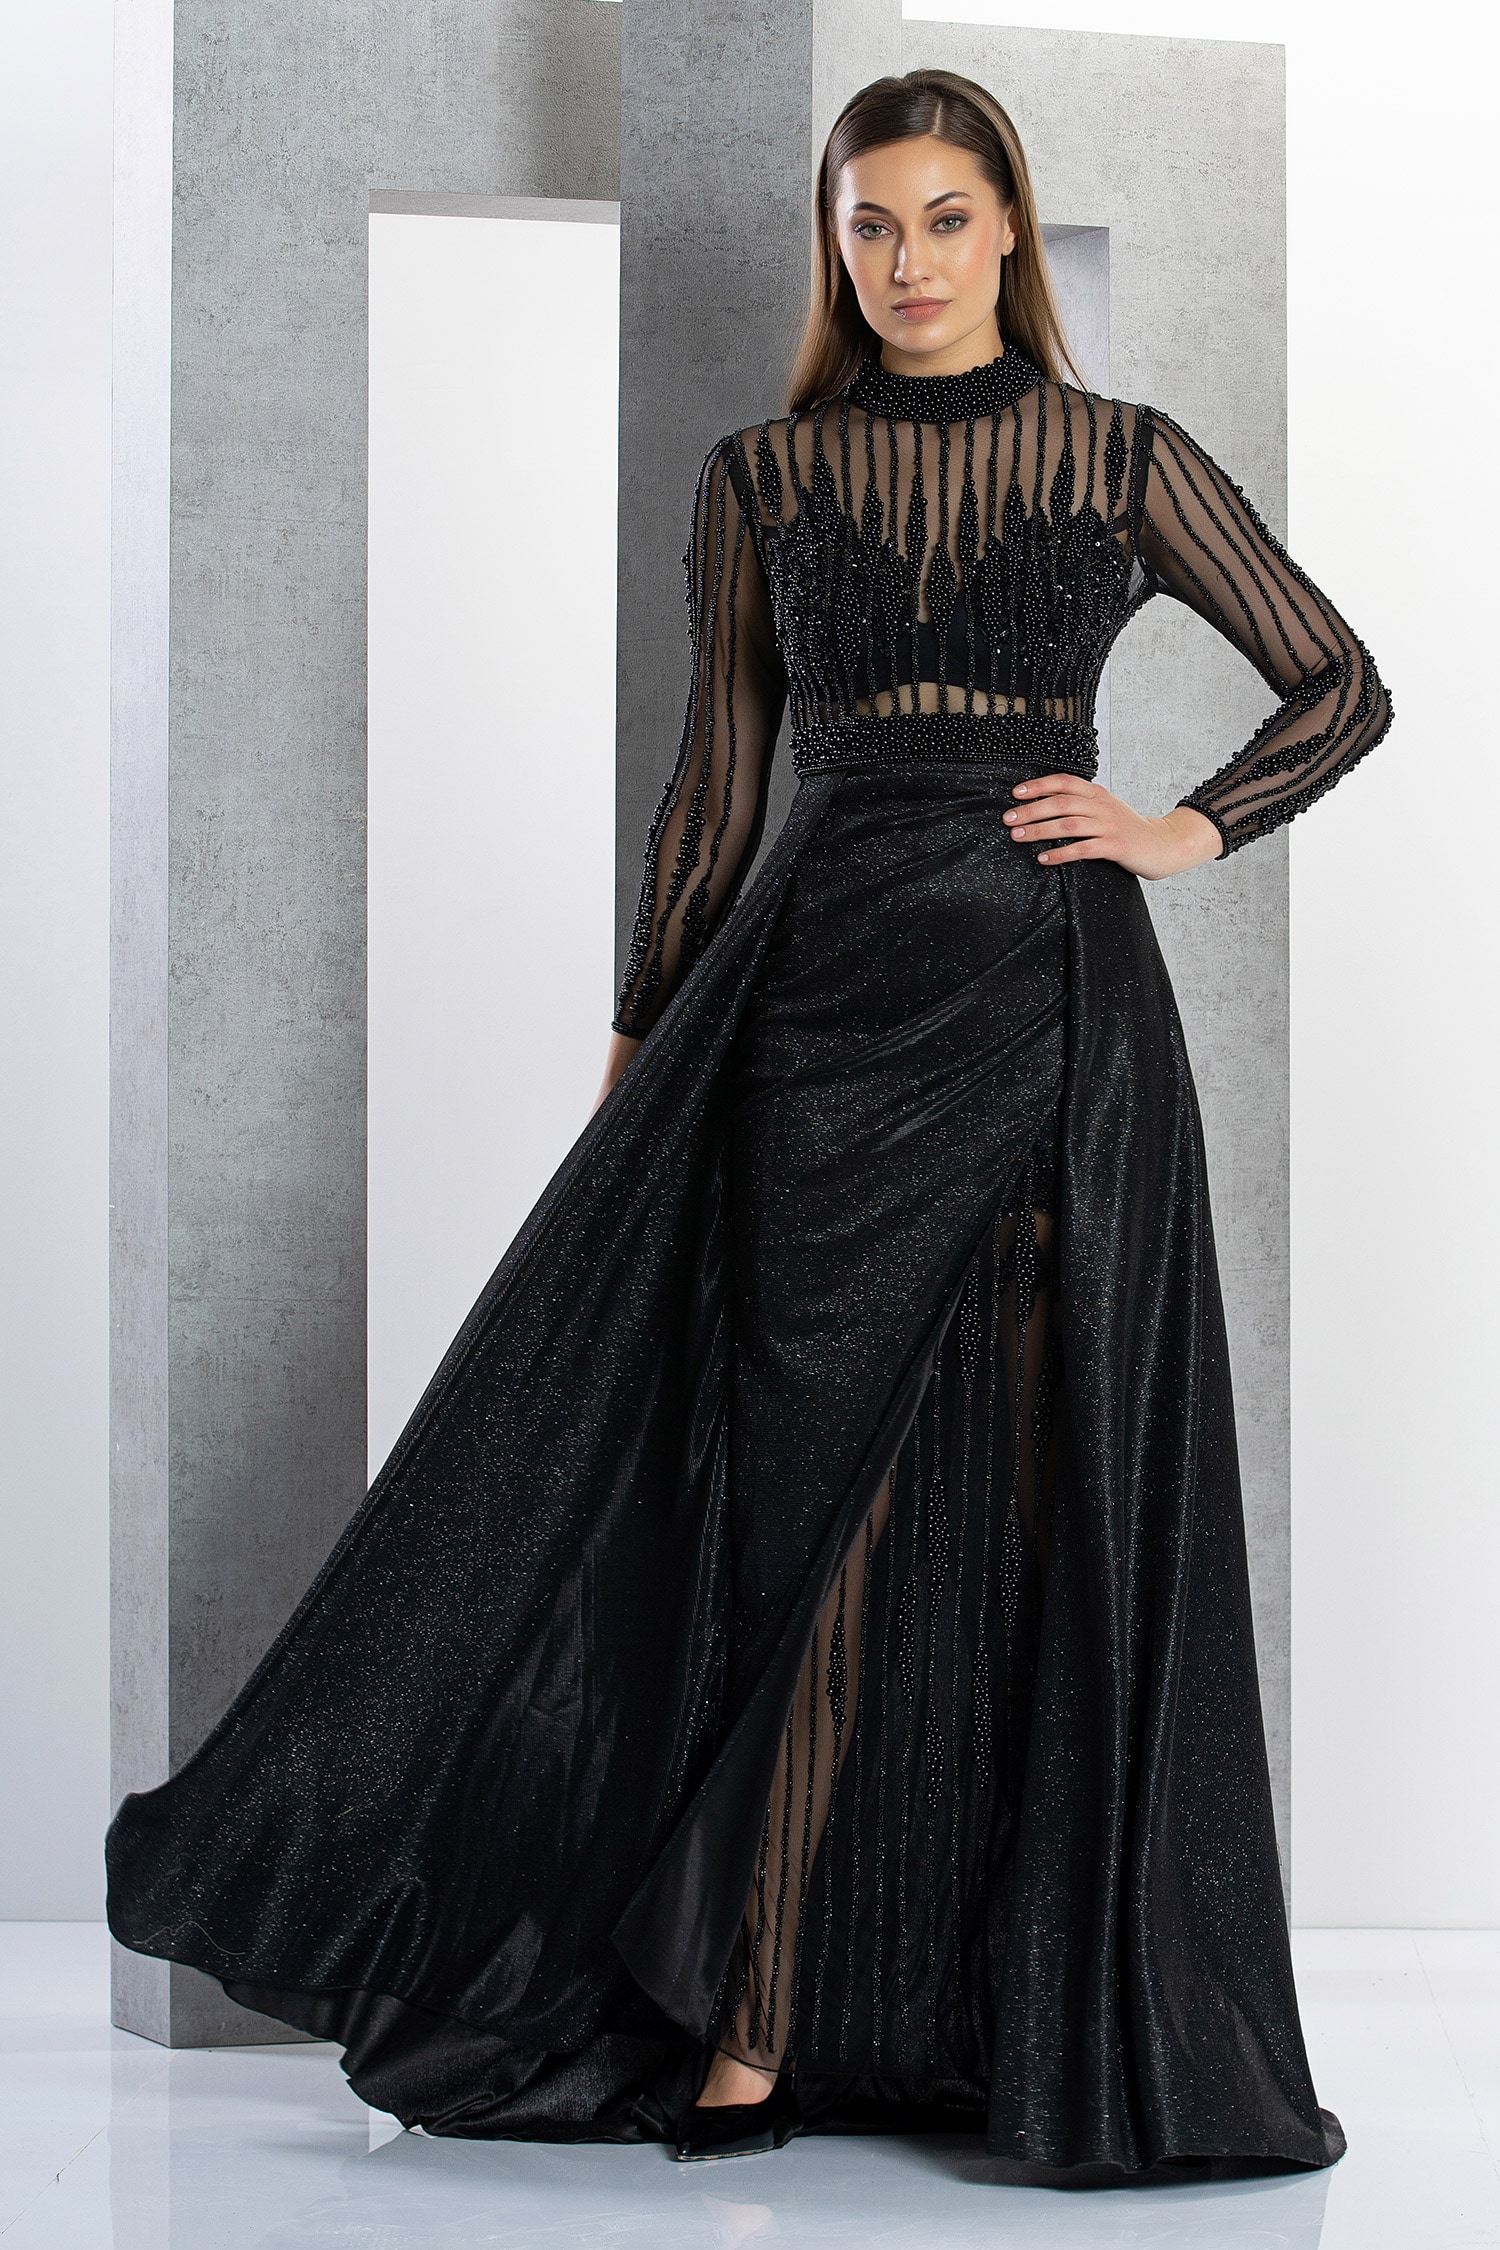 Arabic Dubai Black Sequined A Line Black Sequin Evening Gown With Sheer  Neckline, Glitter Long Sleeves, And Red Carpet Fashion For Prom,  Quinceanera, Or Parties From Greatvip, $108.64 | DHgate.Com